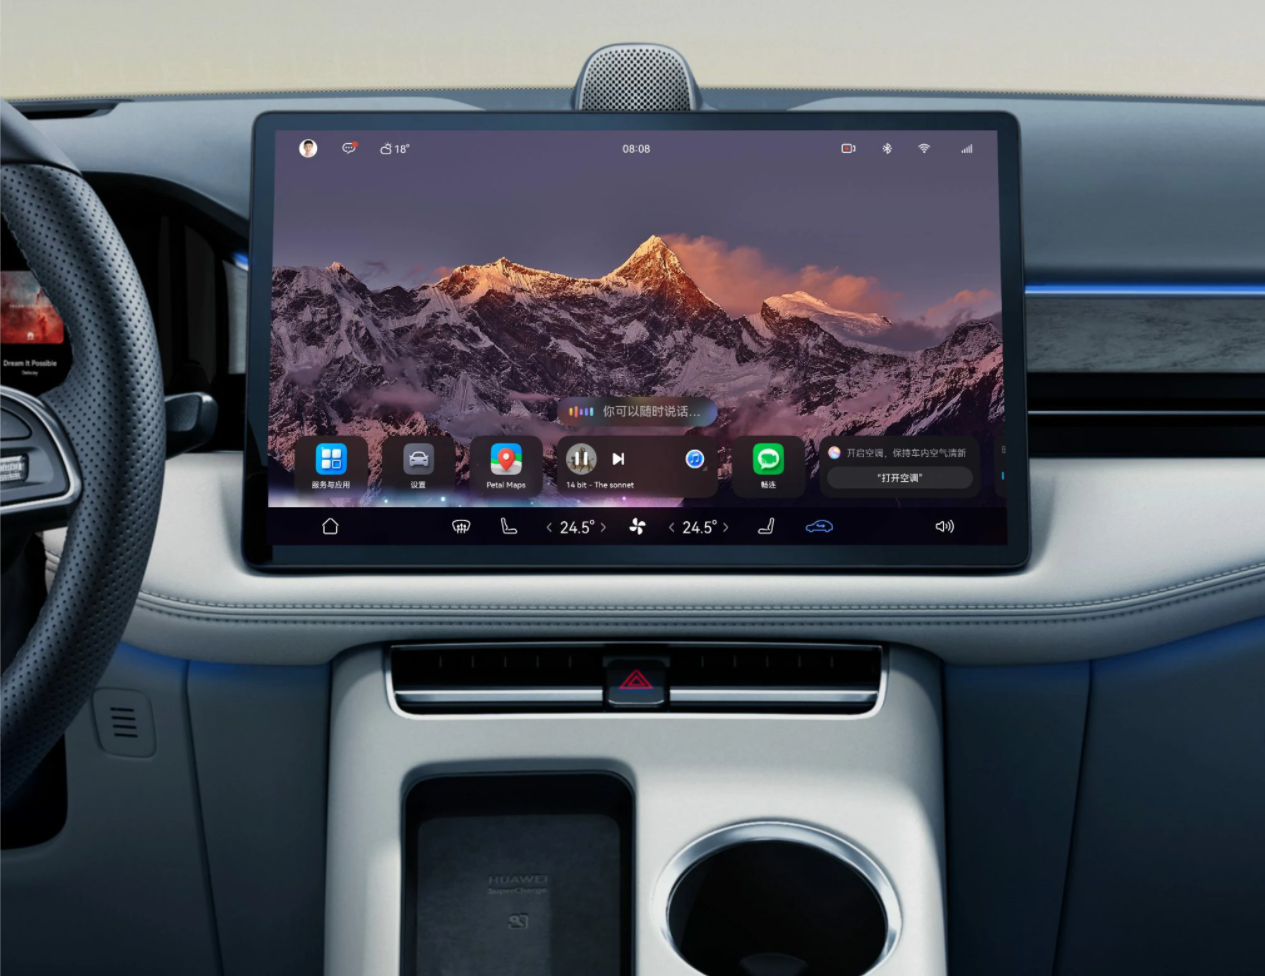 Huawei smart car cockpit housekeeper software approved-1